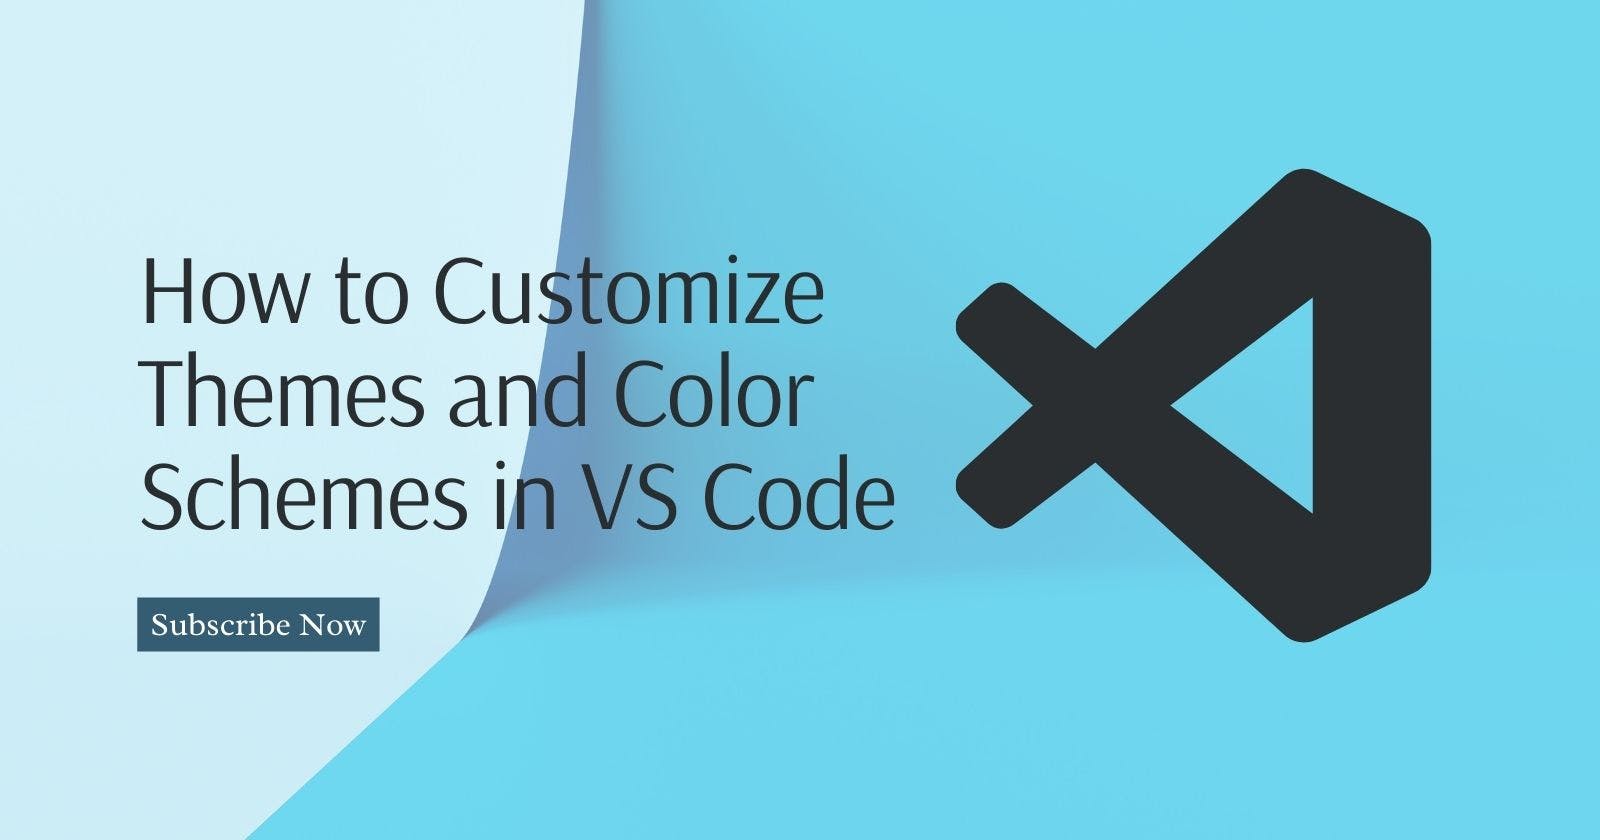 How to Customize Themes and Color Schemes in VS Code